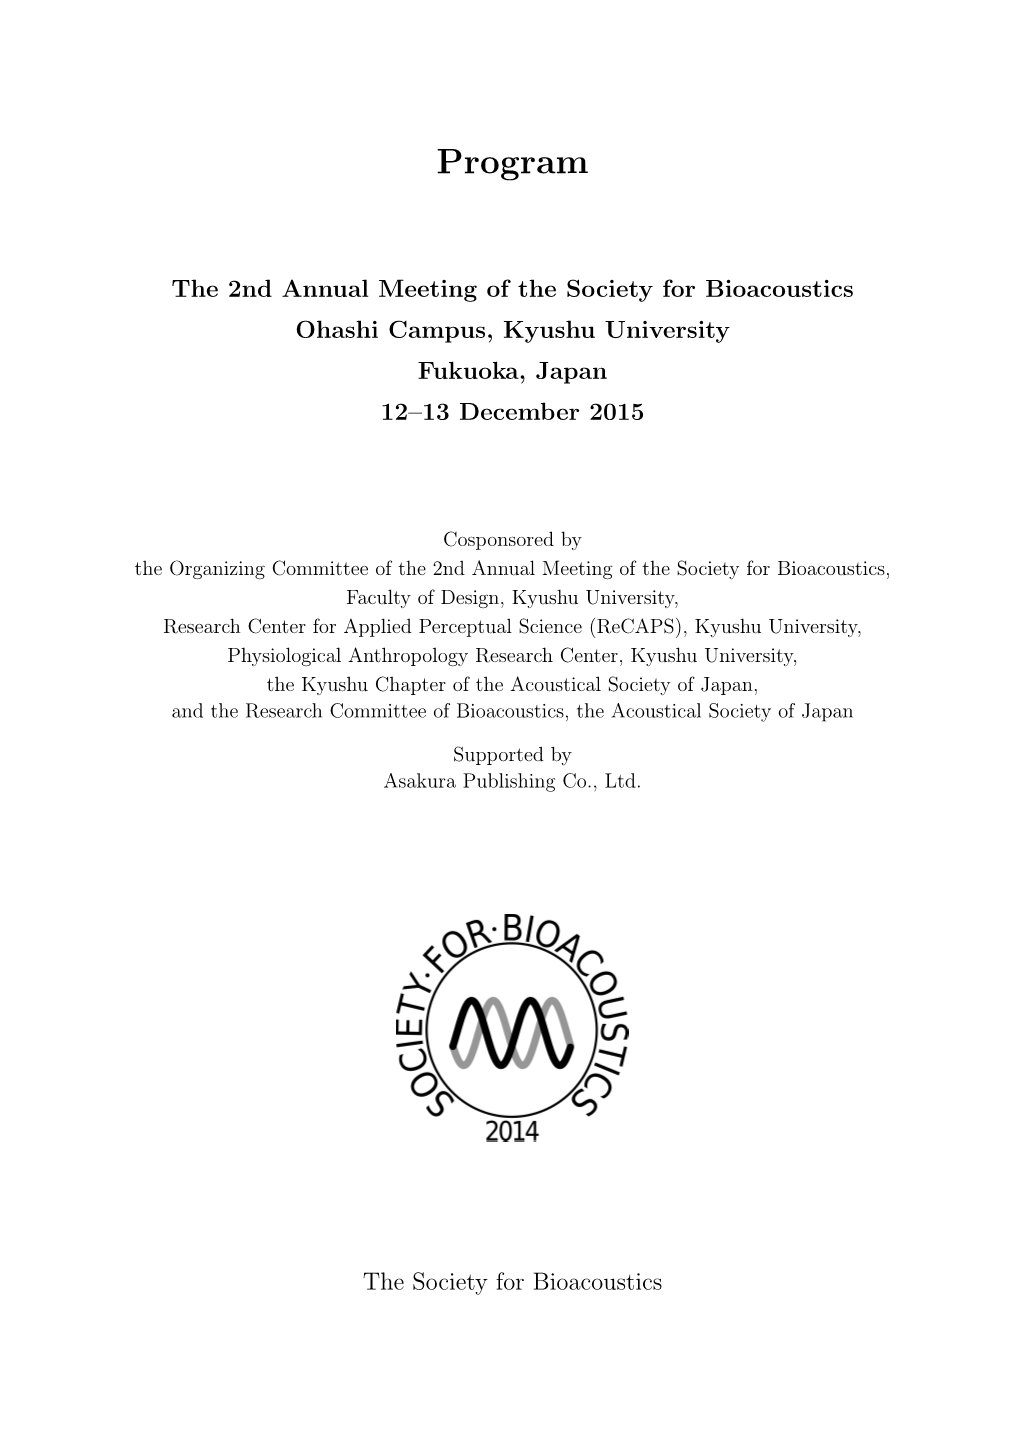 Program of the 2Nd Annual Meeting of the Society for Bioacoustics